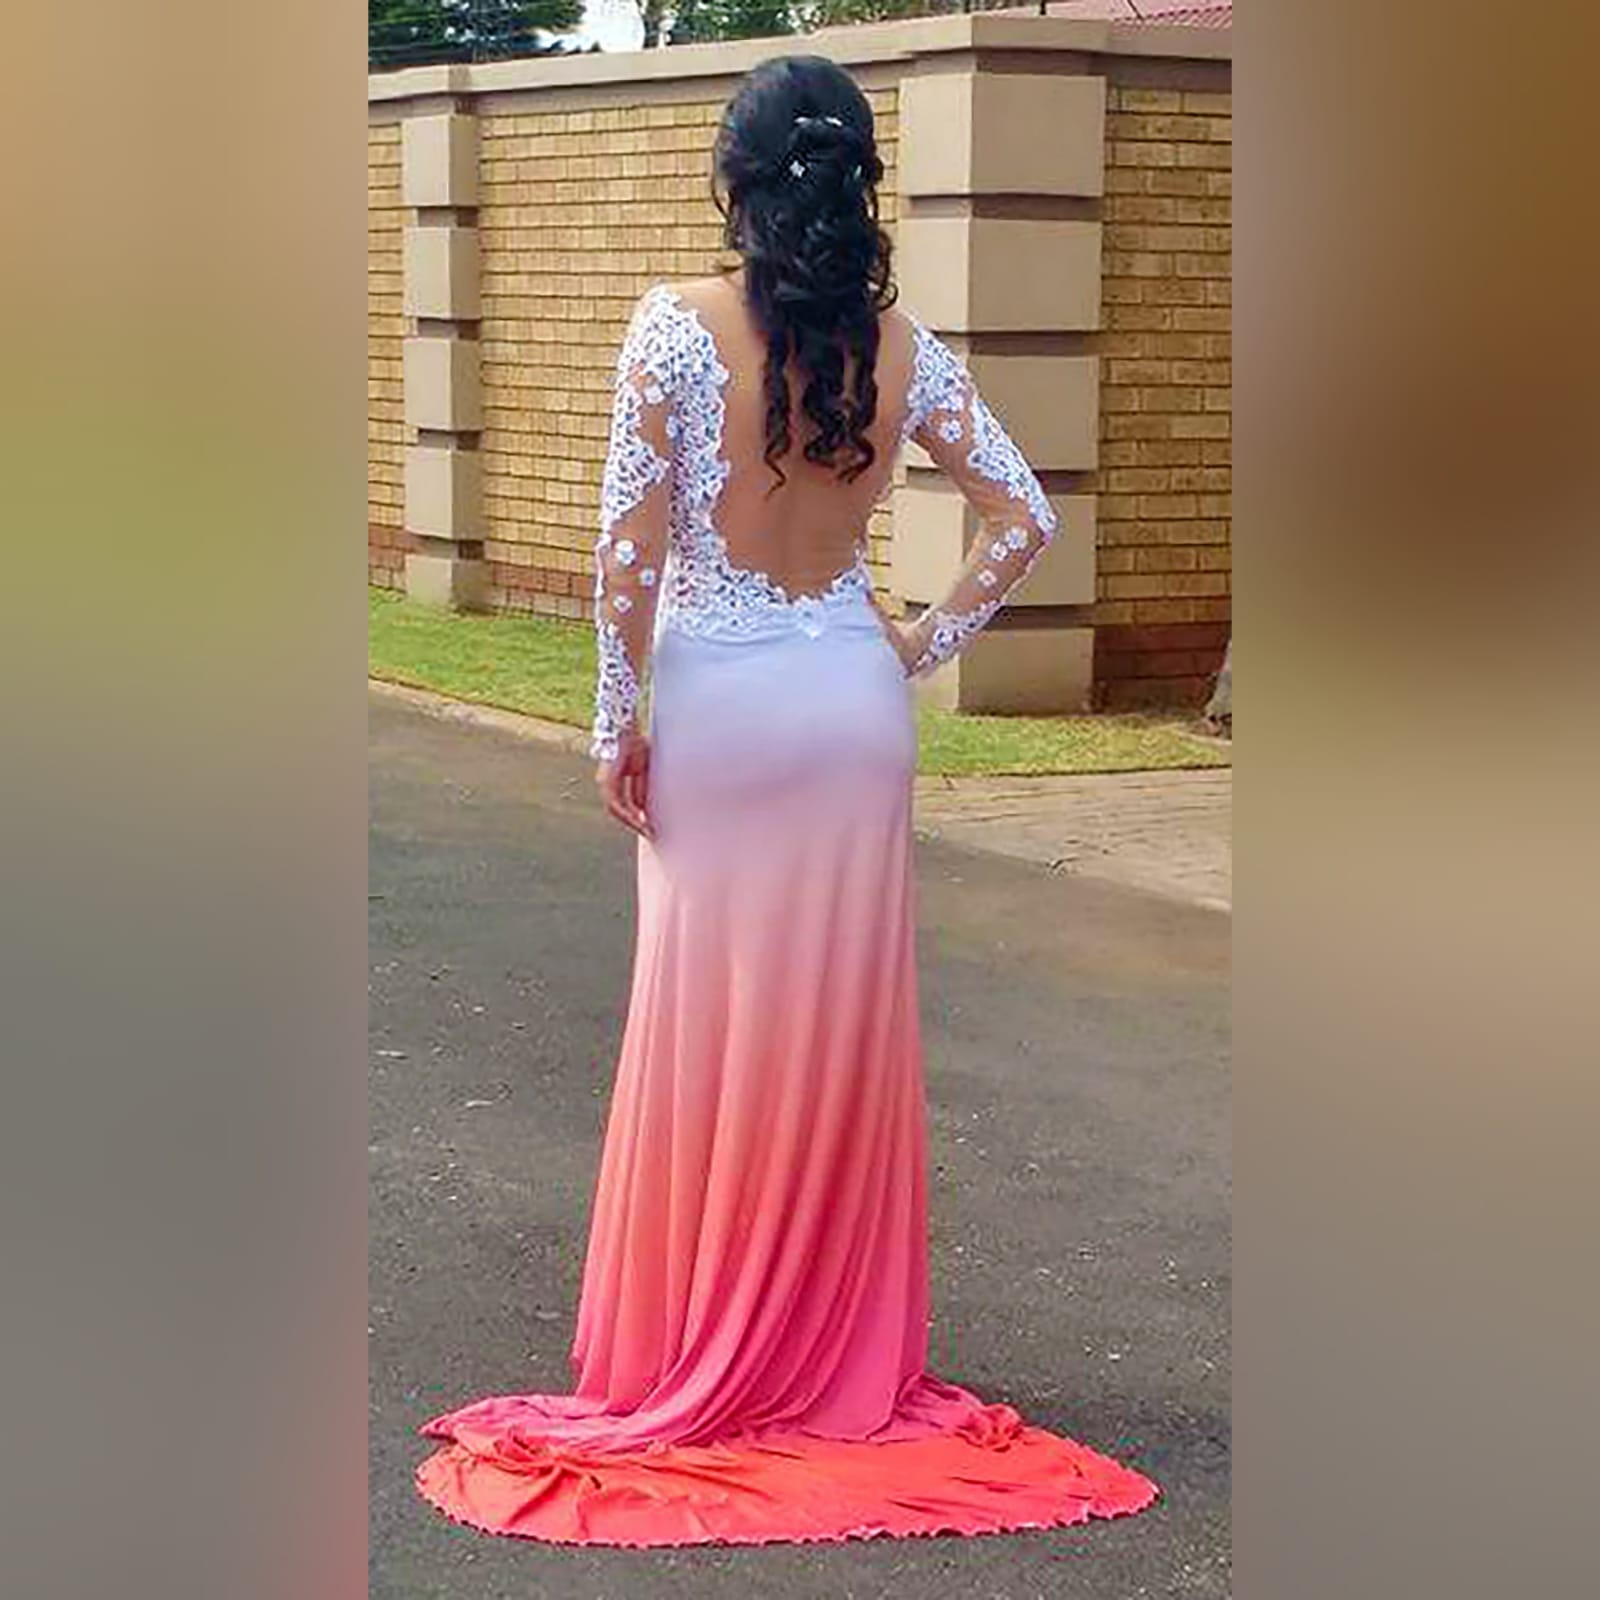 White and peach ombre matric farewell dress with a white lace bodice 5 white and peach ombre matric farewell dress with a white lace bodice, an illusion open back and long sleeves. With a slit and a train.